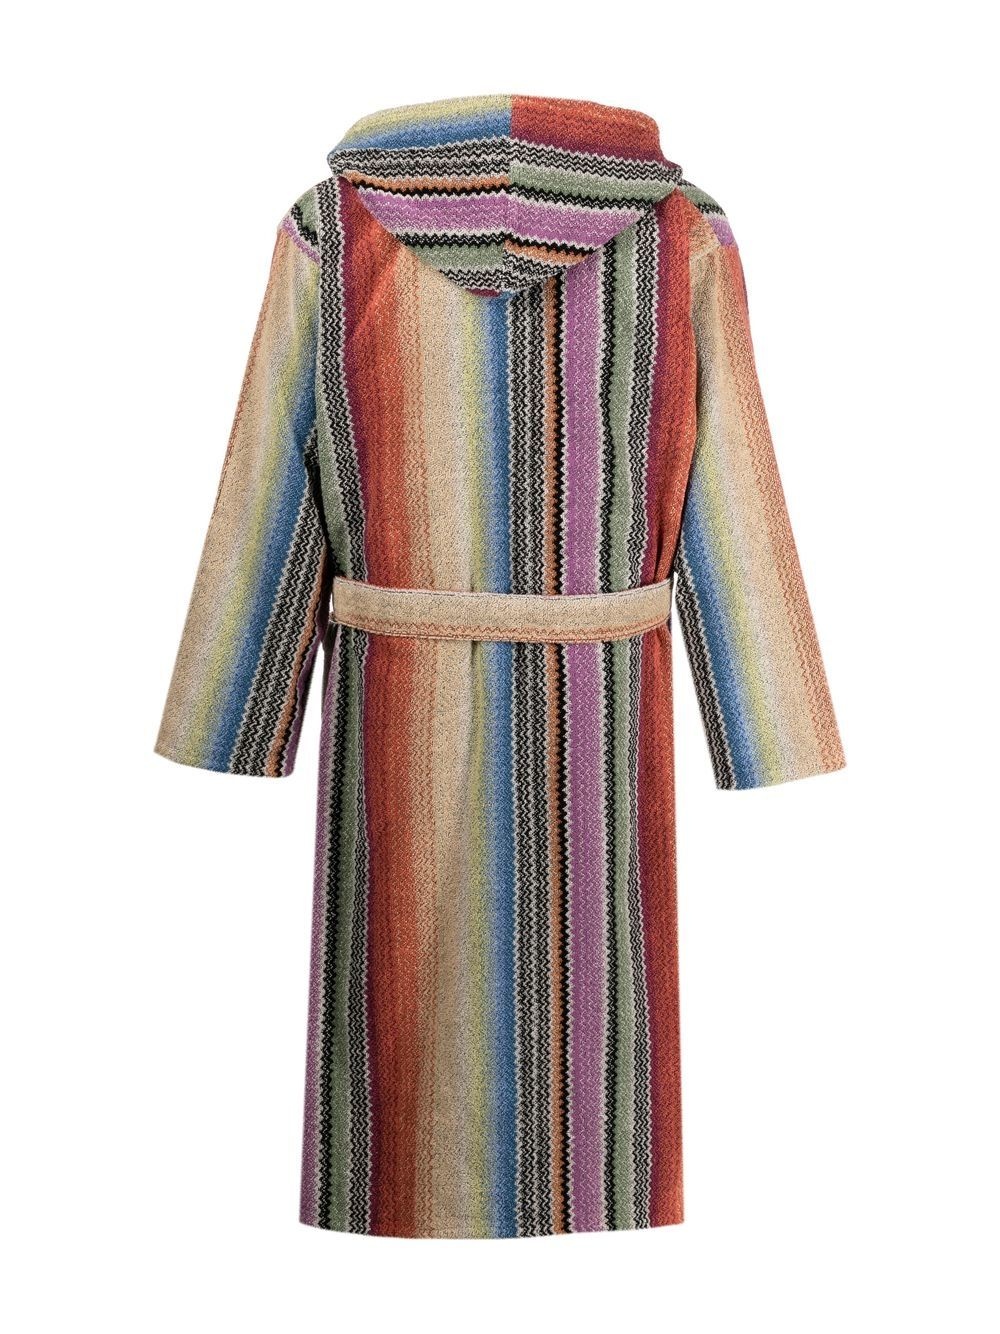 Archie zigzag pattern hooded robe - 2